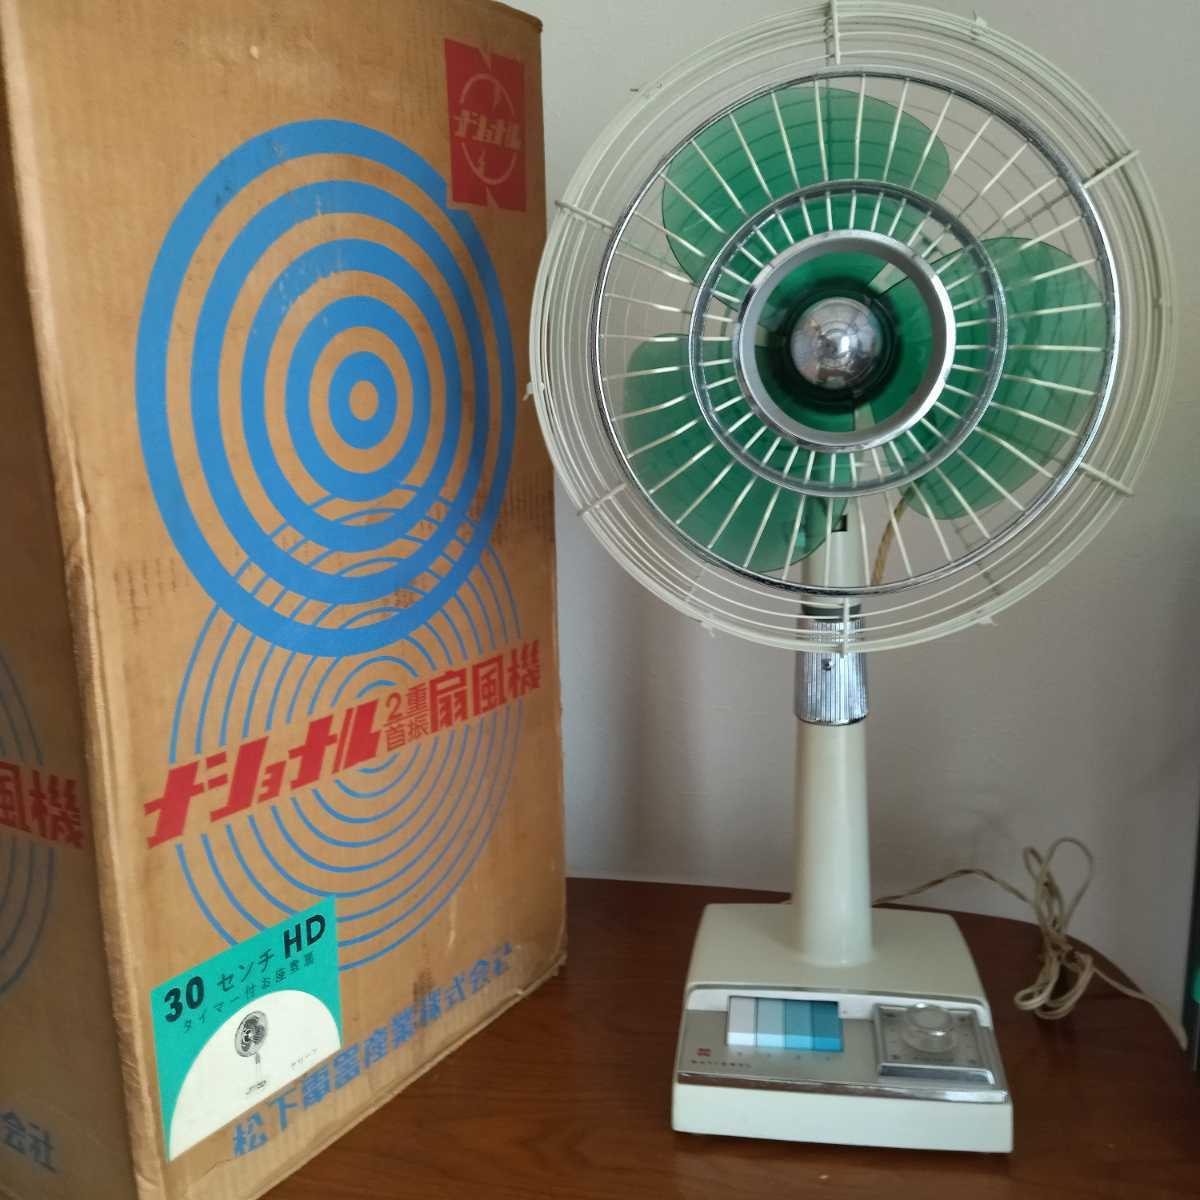 * operation verification settled retro electric fan NATIONAL ELECTRIC FAN 30HD National Matsushita electro- vessel 30cm Showa Retro electric fan retro consumer electronics 2 -ply neck . timer attaching 